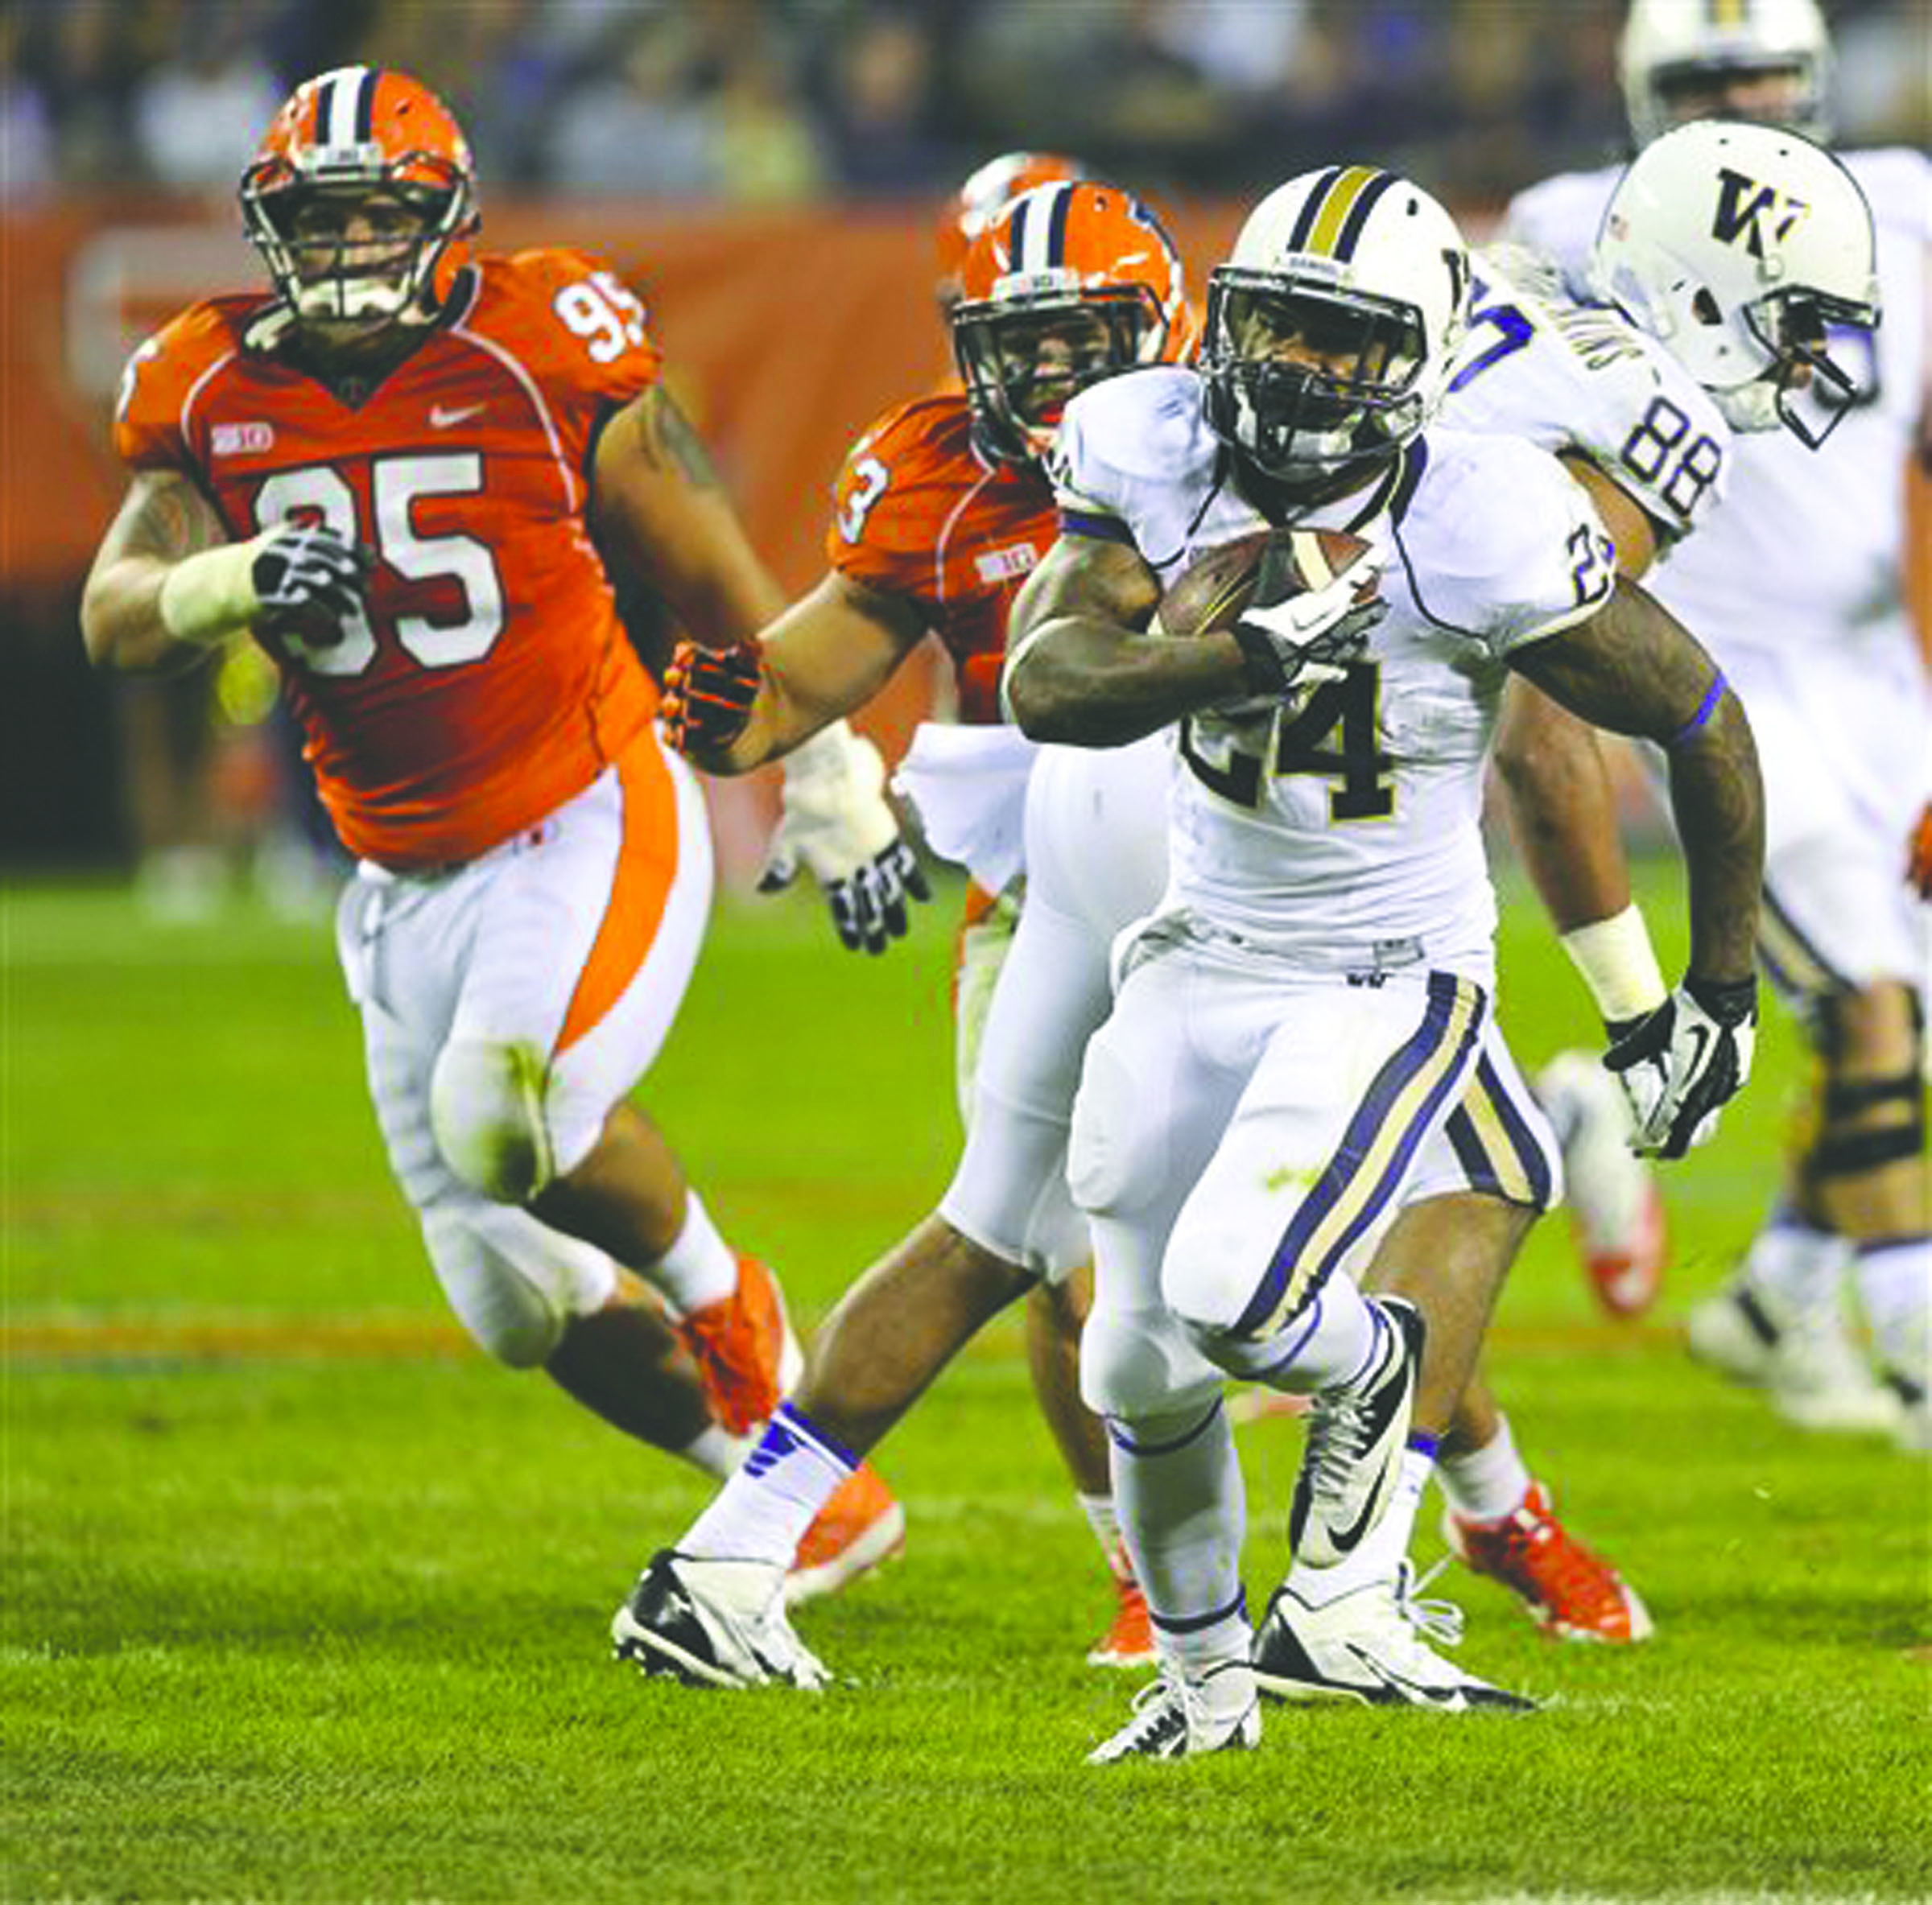 Washington’s Jesse Callier (24) heads upfield and outruns the Illinois defense during the second half of today’s game in Chicago. Washington defeated Illinois 34-24.  -- AP Photo by Jim Prisching)